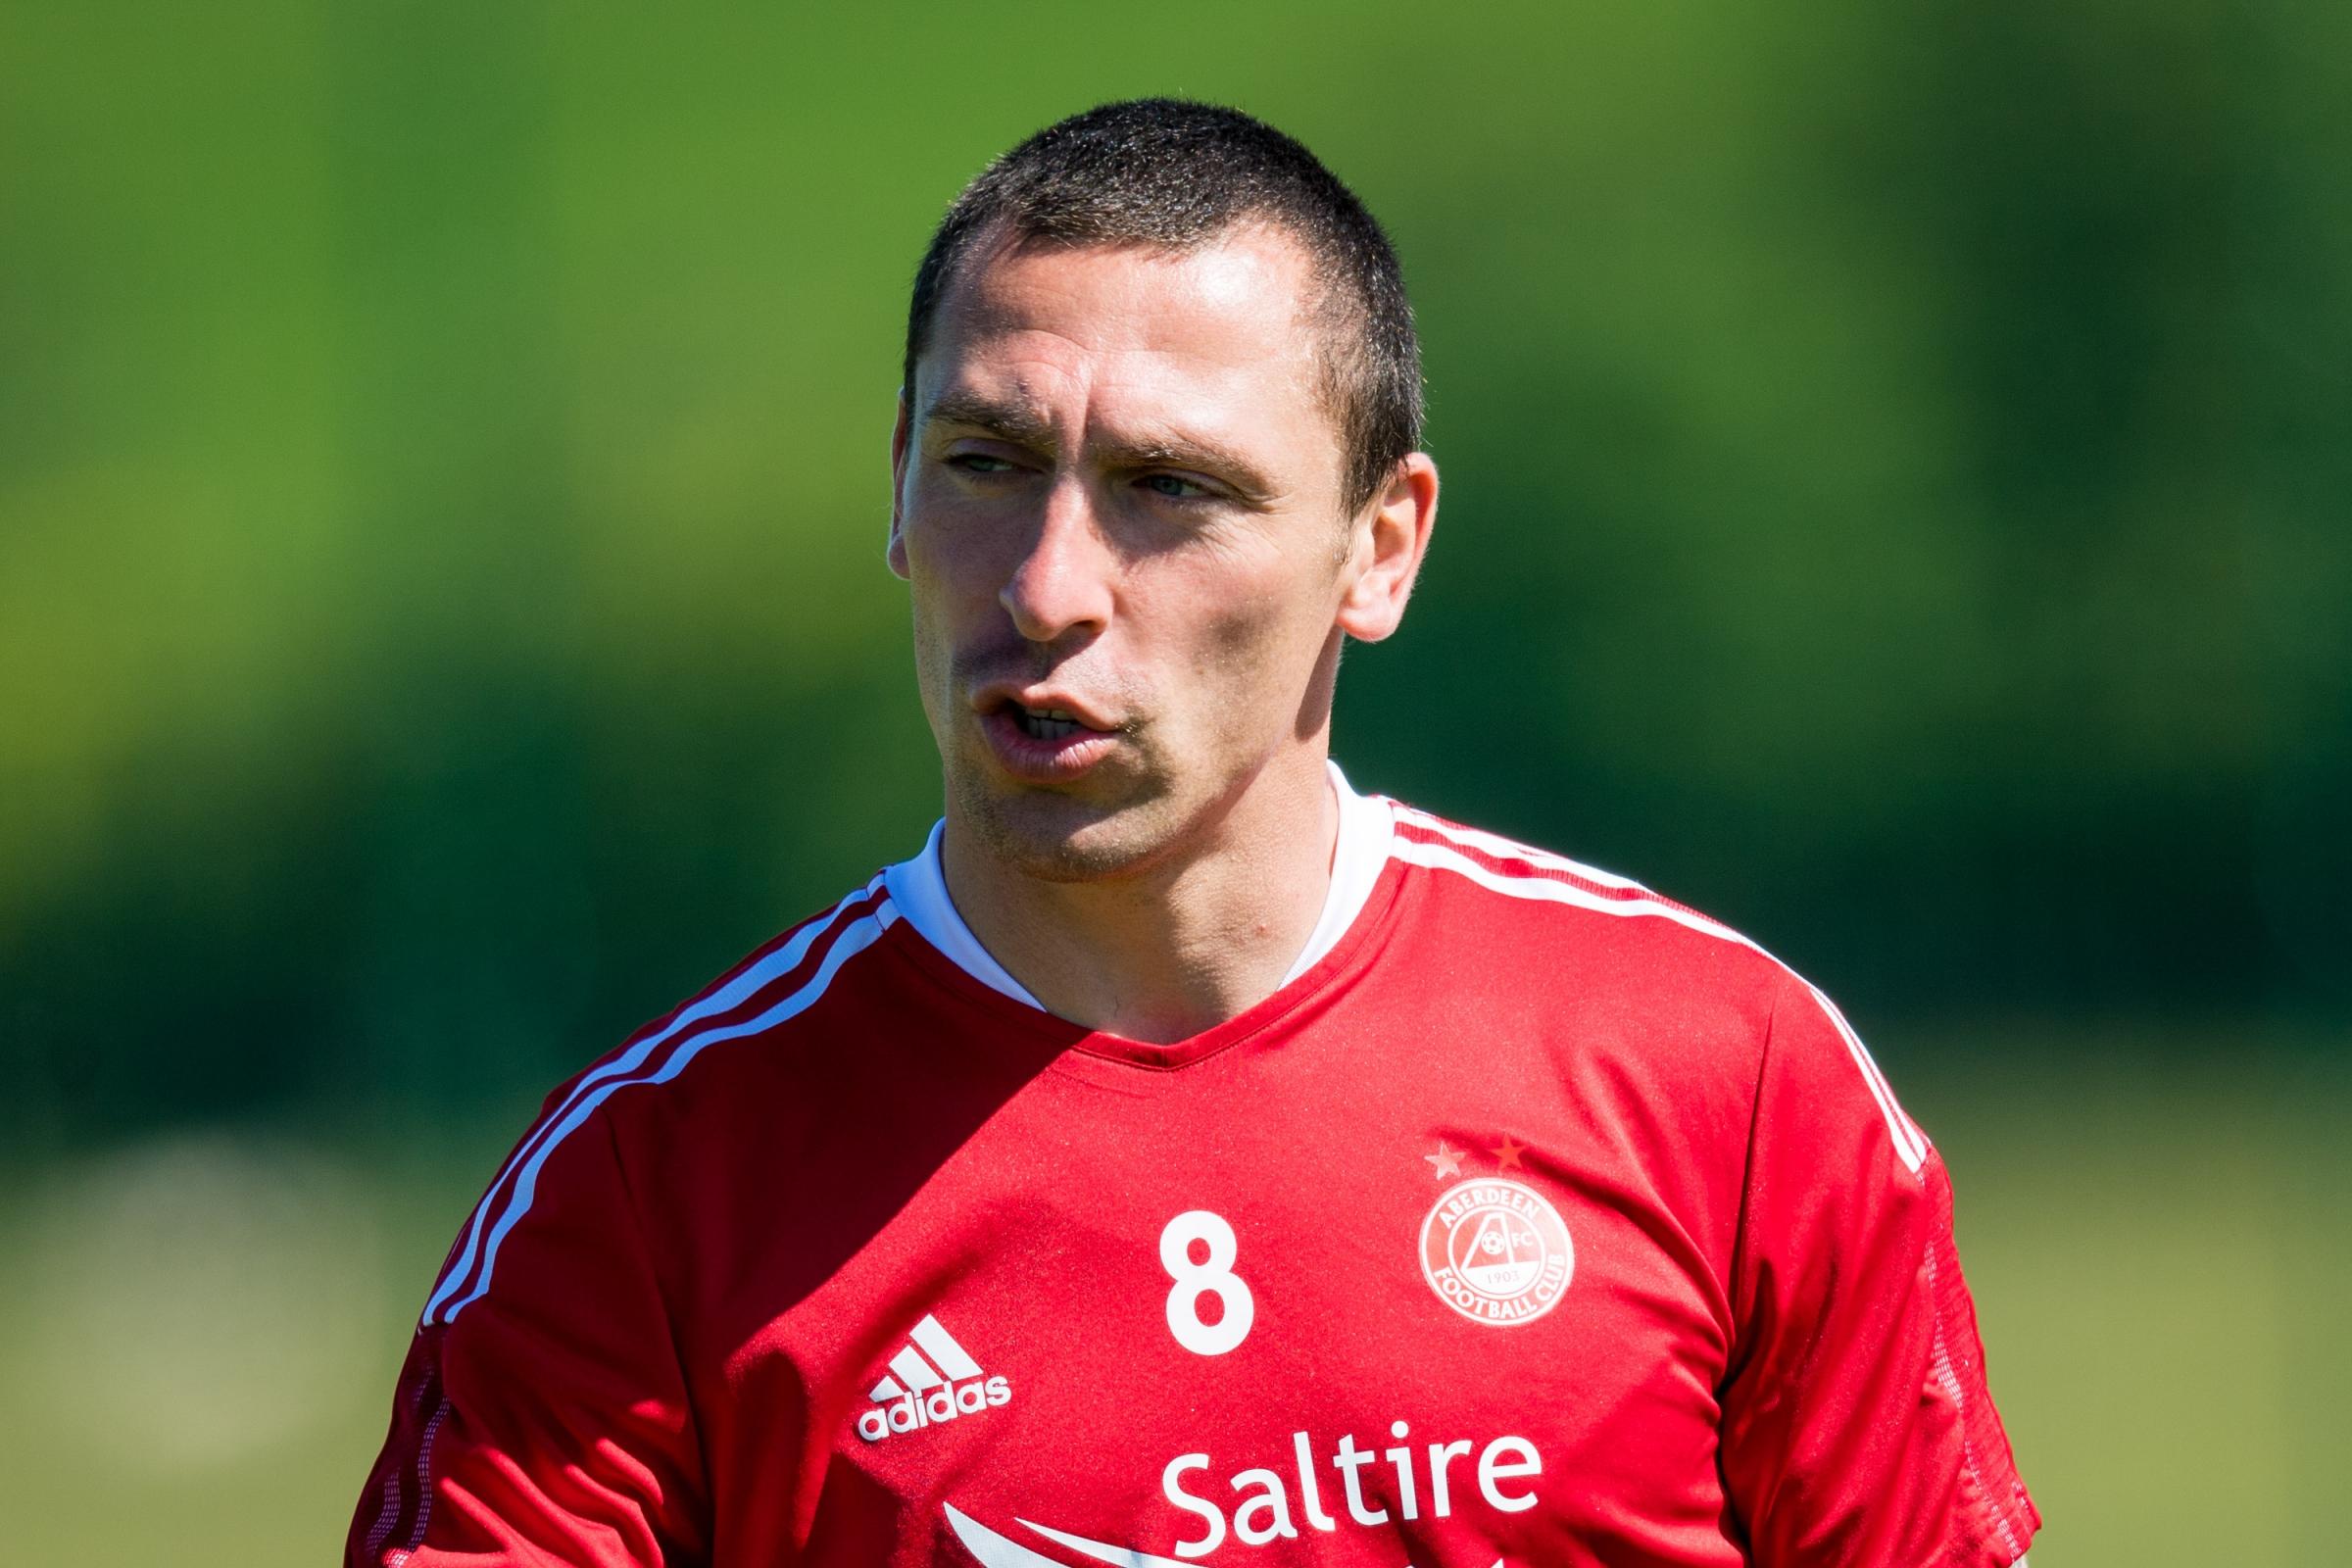 Aberdeen skipper Scott Brown can't wait for reunion with Dundee United boss Tam Courts